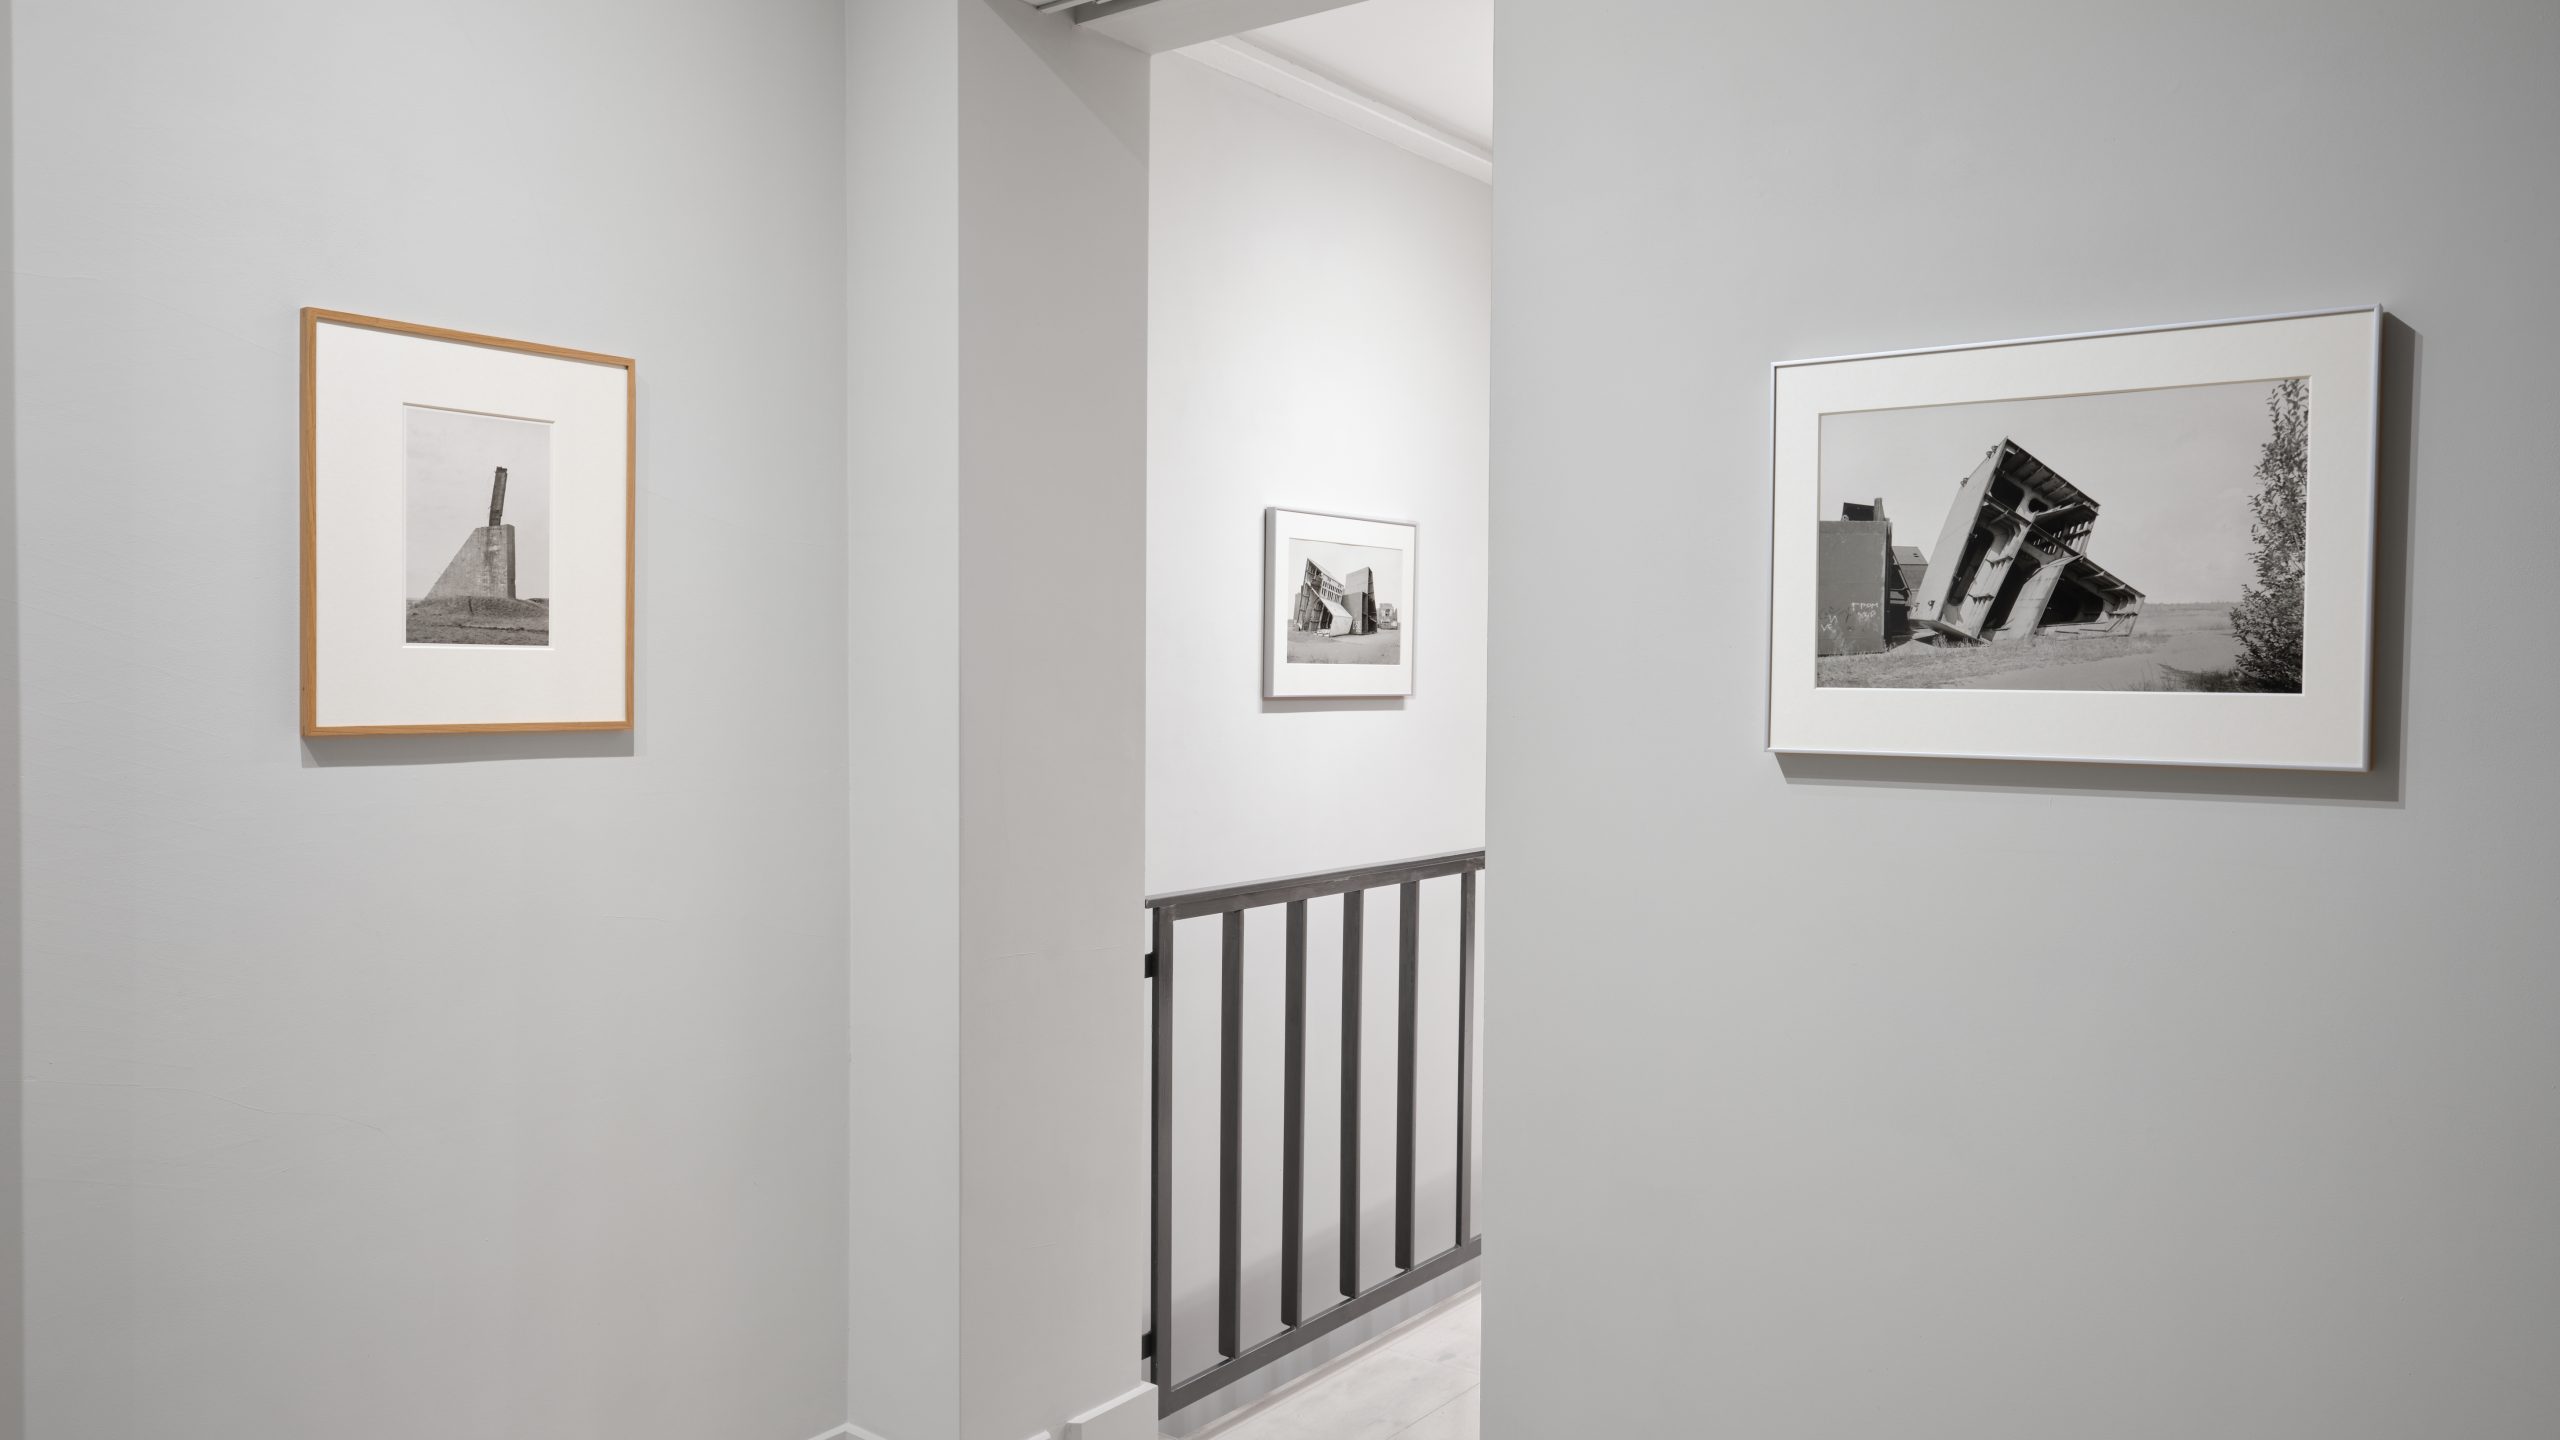 Installation view of a gallery space. Shows three framed photographs. To the left, a photograph of an architectural tower. To the right, a photograph of an anonymous building or sculpture. In the middle, a second photograph of an an anonymous building or sculpture.